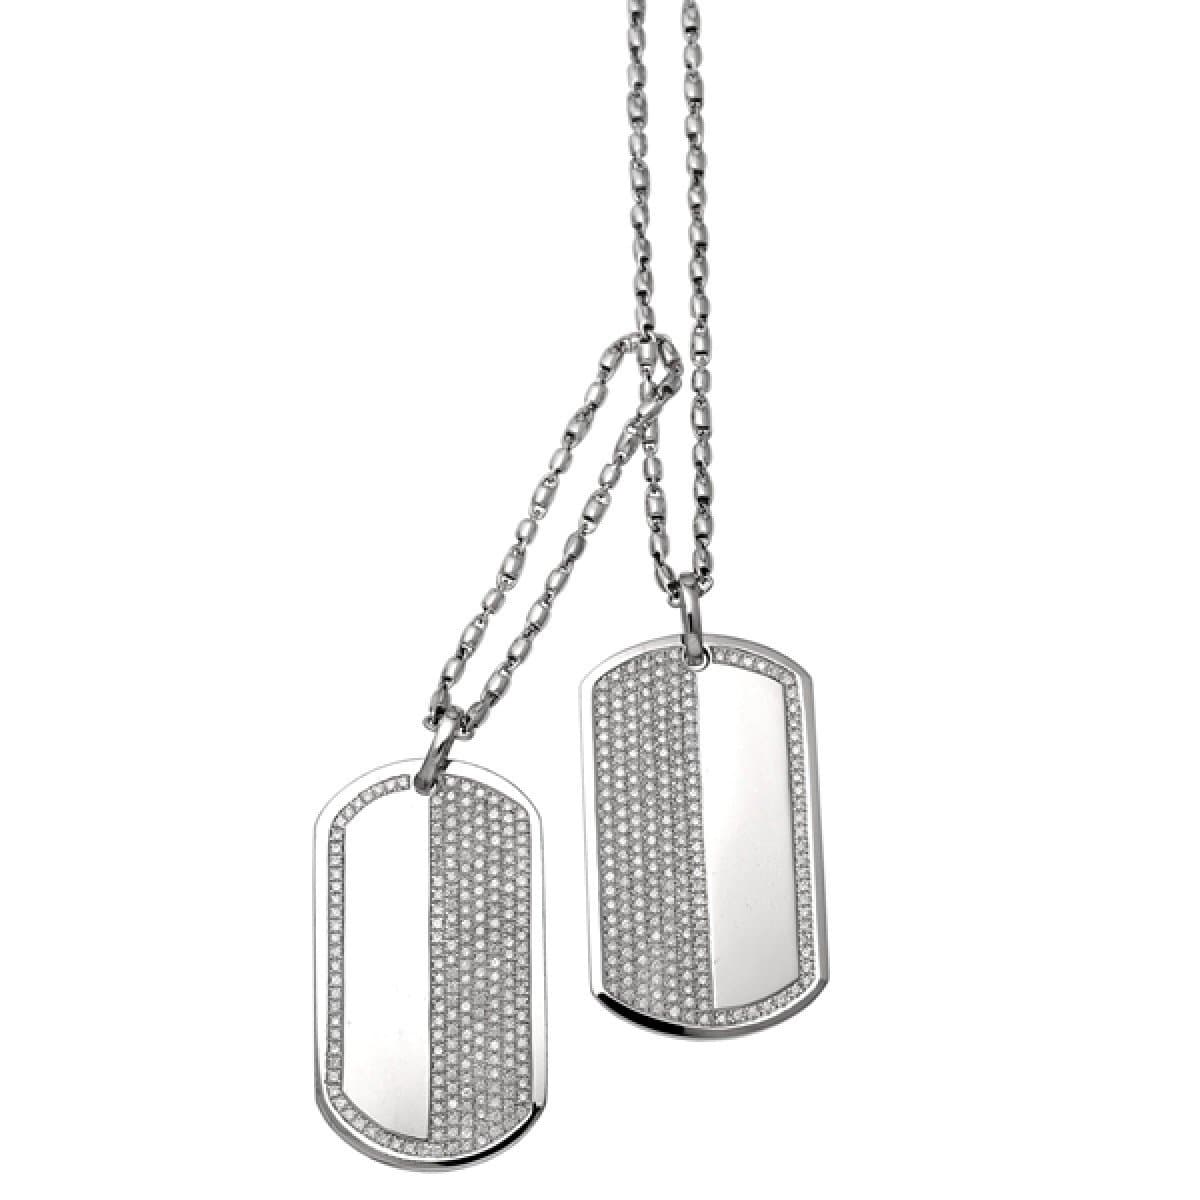 White Gold and Diamonds Dog Tag Necklace - 18-karat Solid White Gold Double Dog Tags